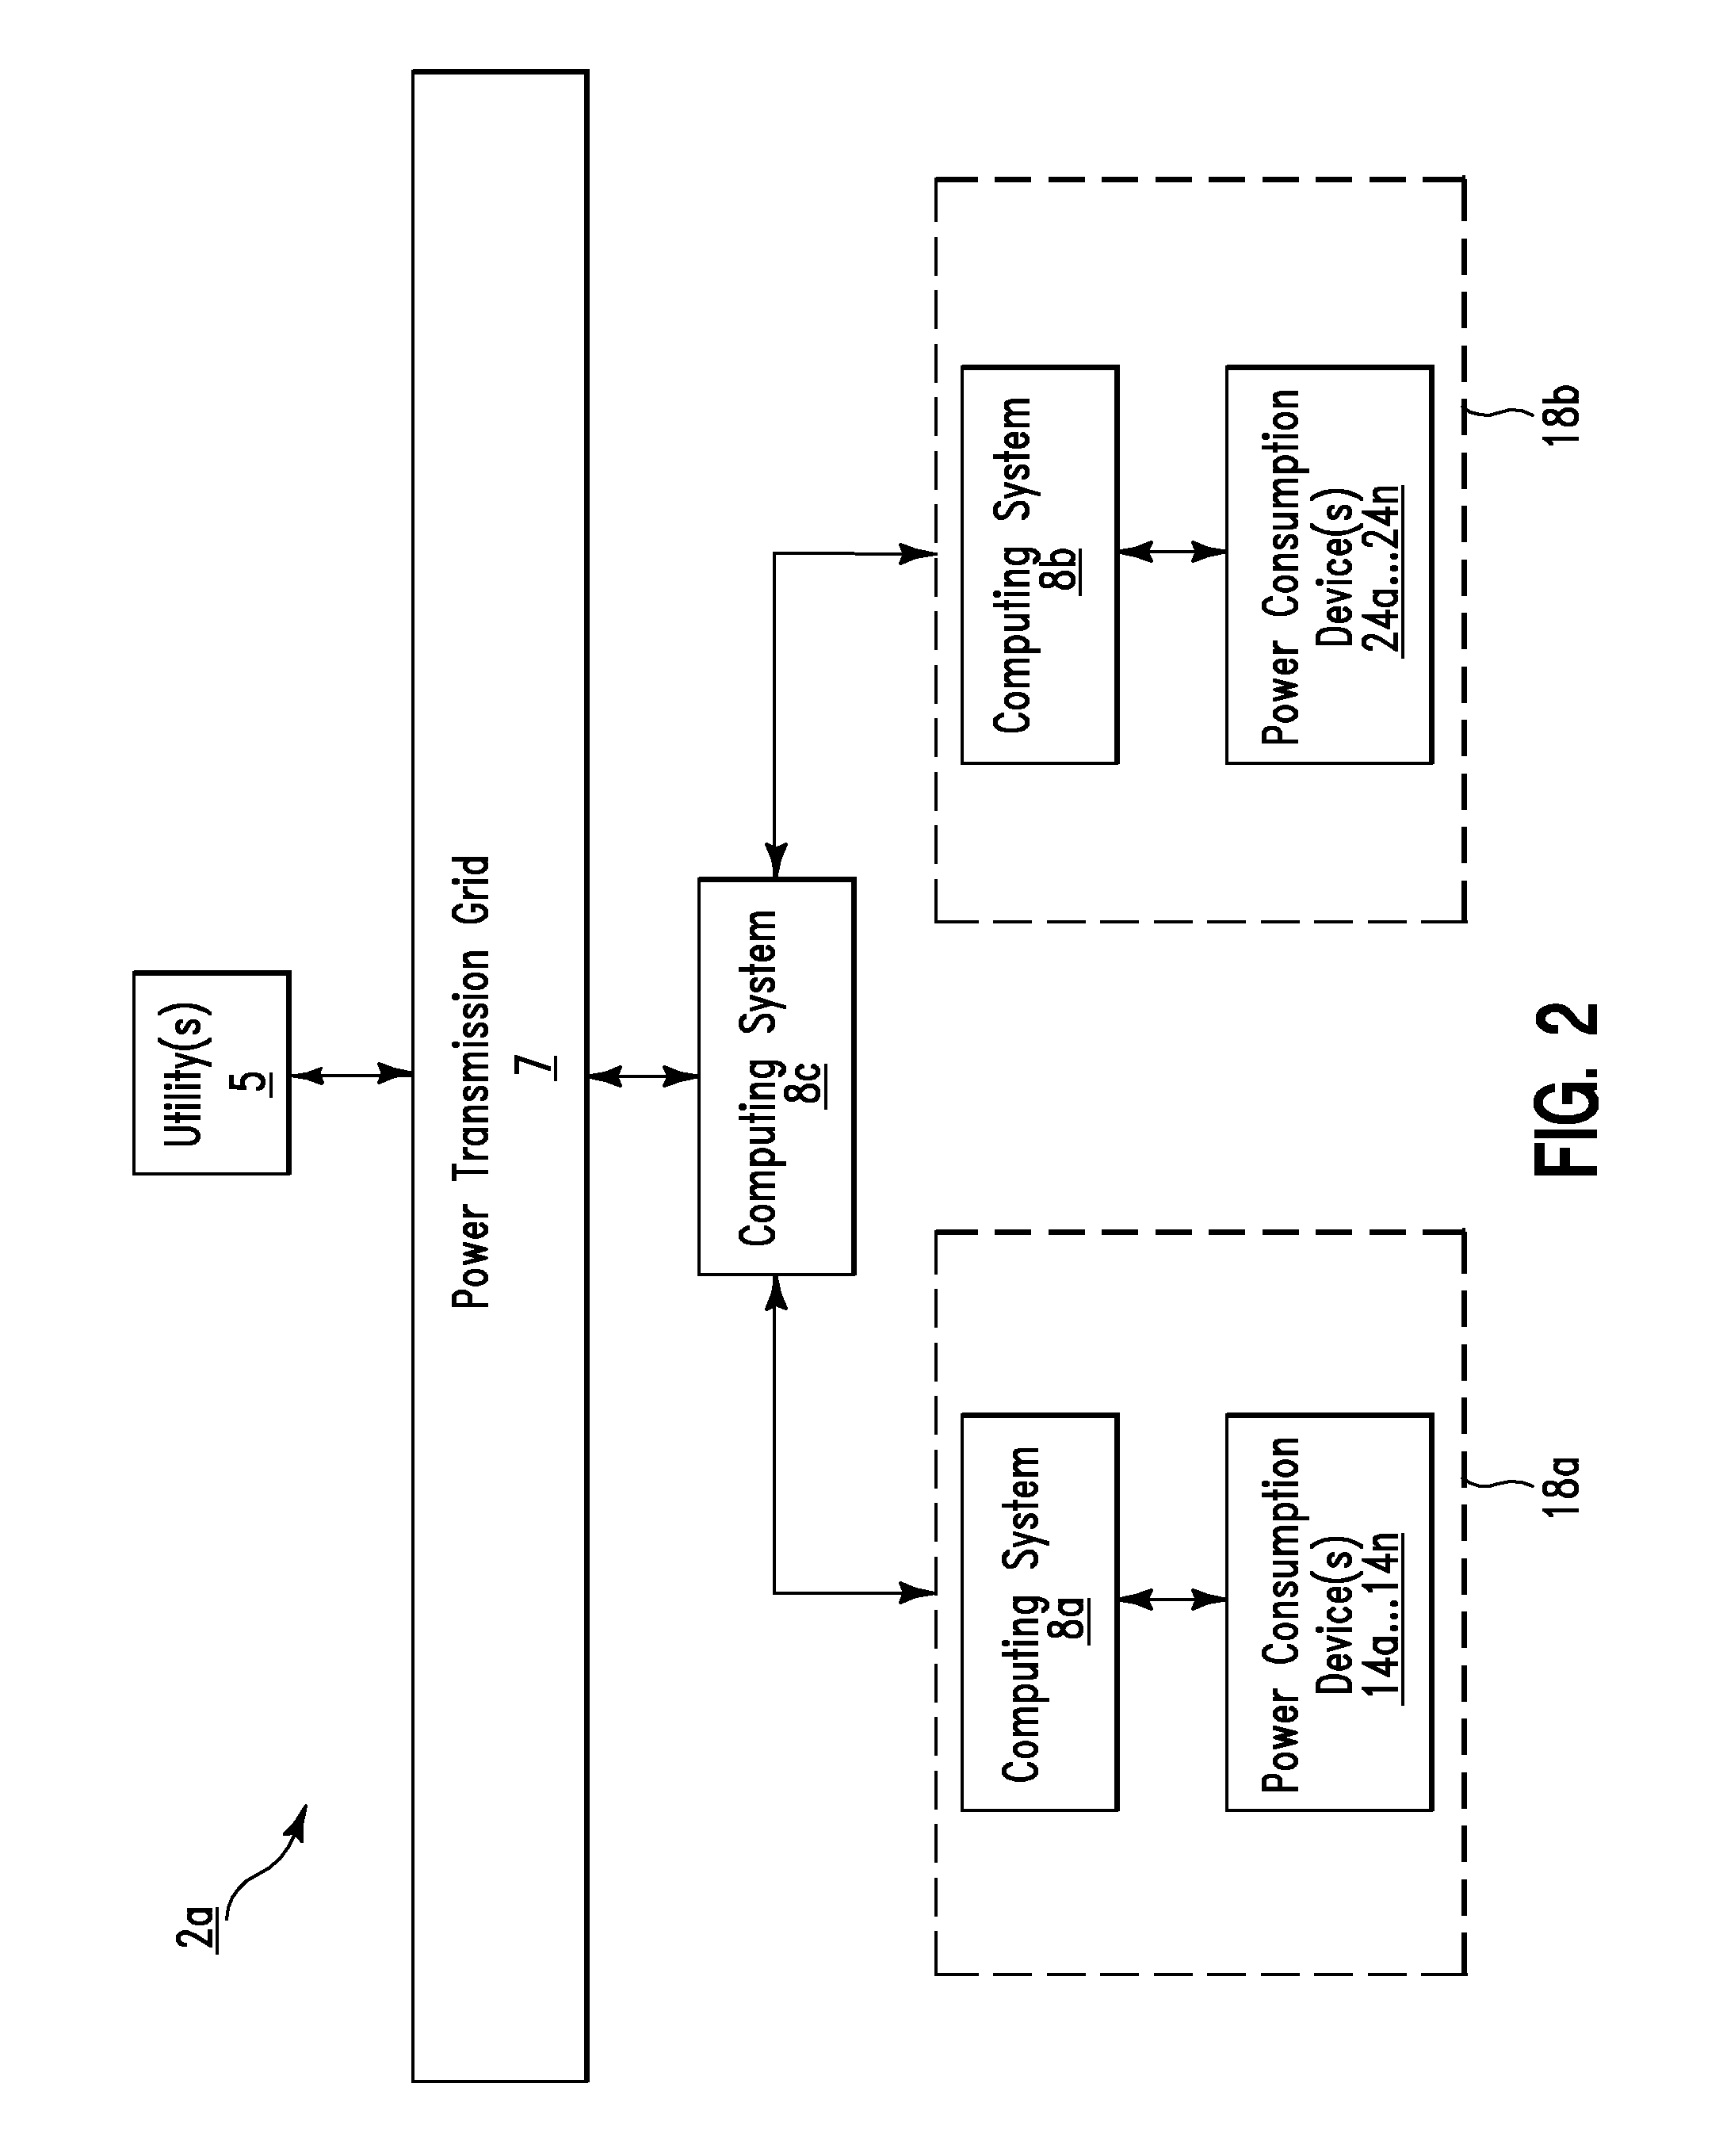 Power management method and system